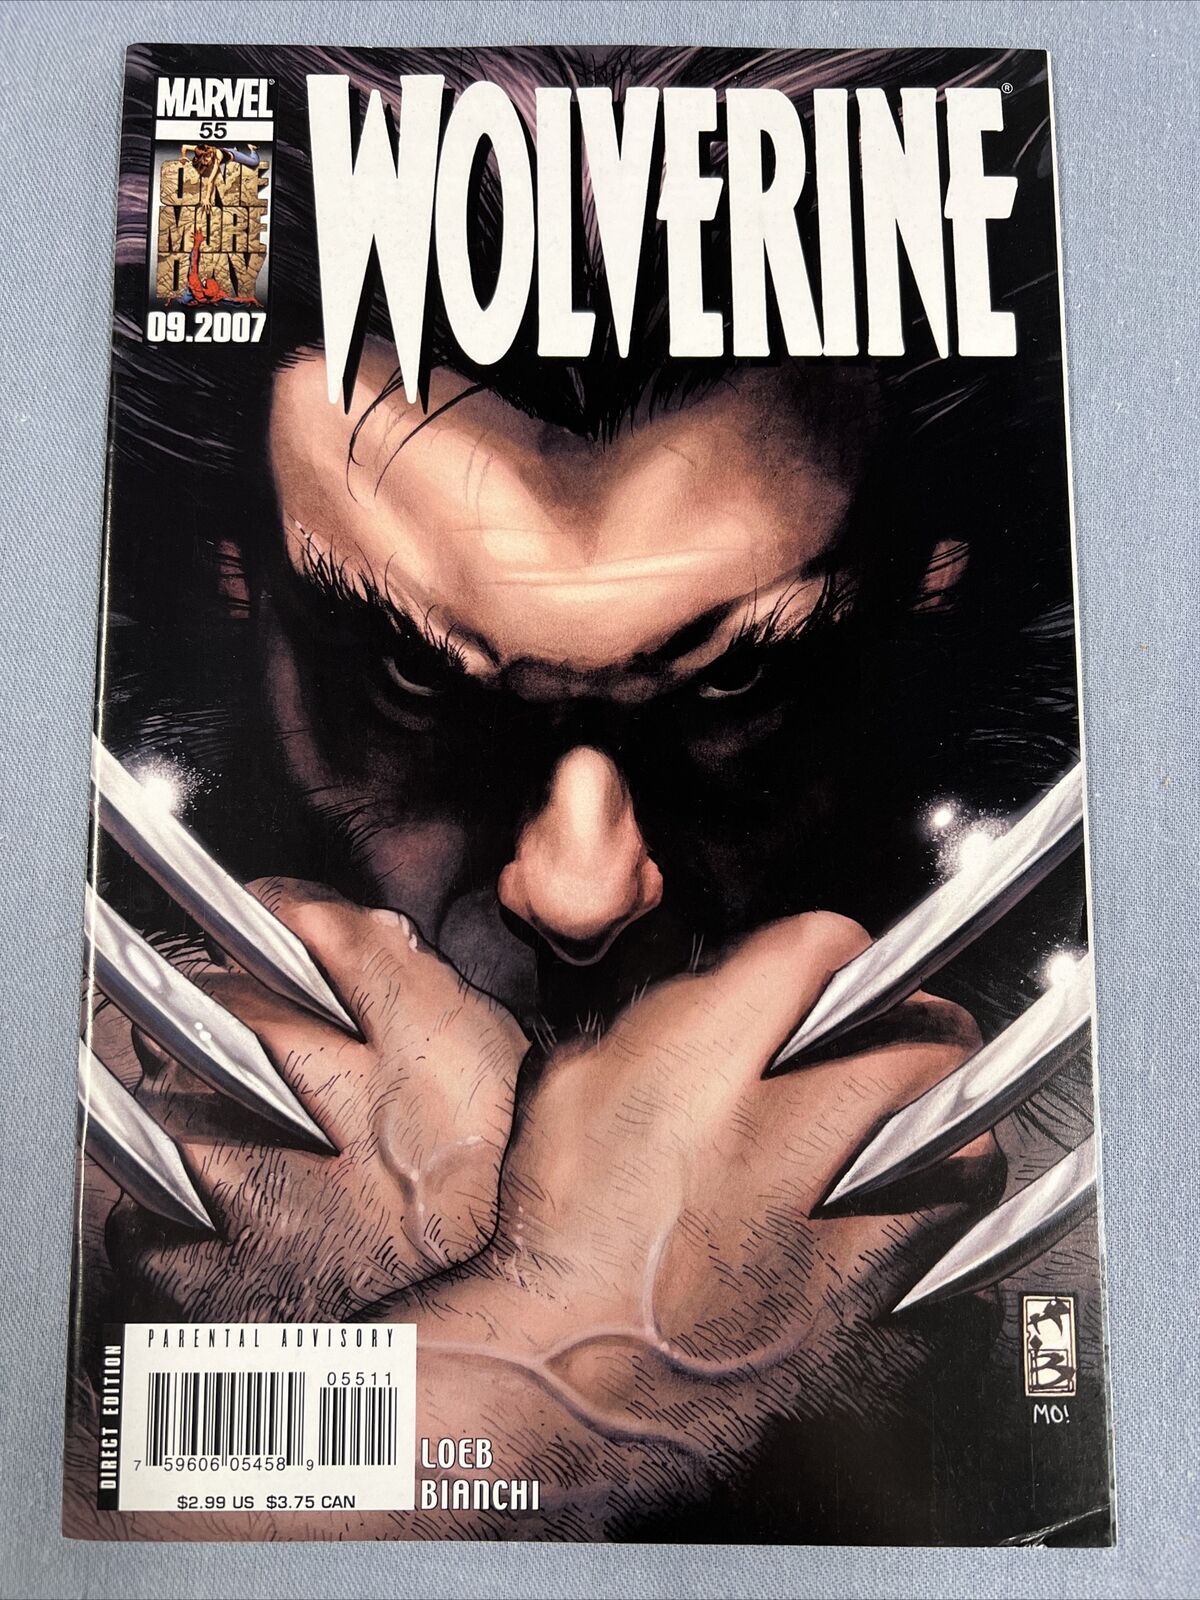 MARVEL Comics Wolverine #55 w/ Sabertooth Cover A (2007)  VG